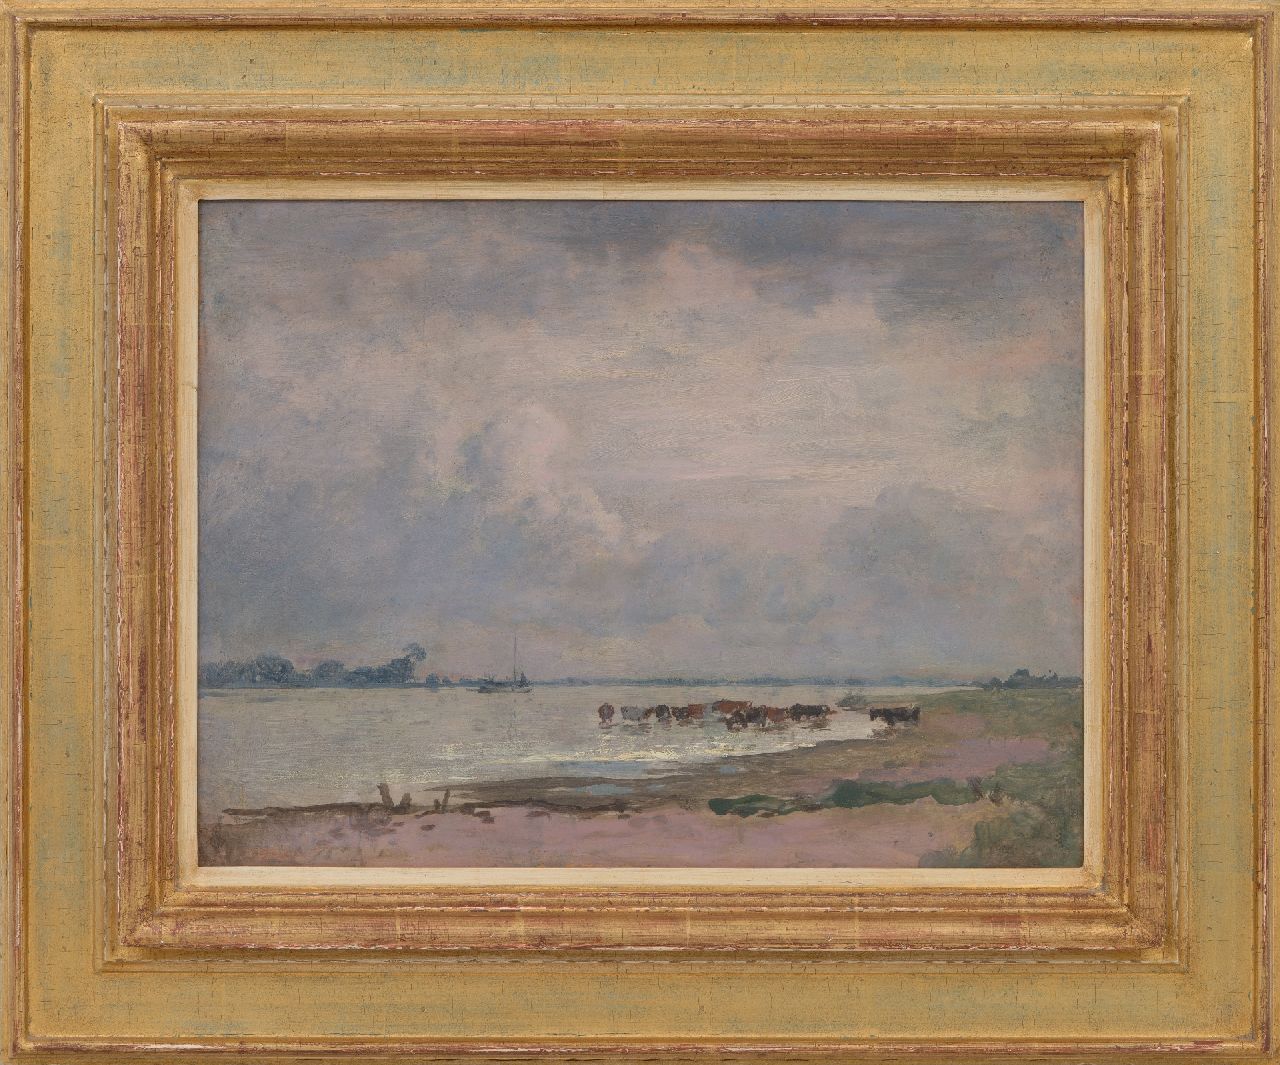 Voerman sr. J.  | Jan Voerman sr. | Paintings offered for sale | View of the river IJssel with watering cows, oil on panel 31.4 x 41.2 cm, signed with stamp on the reverse